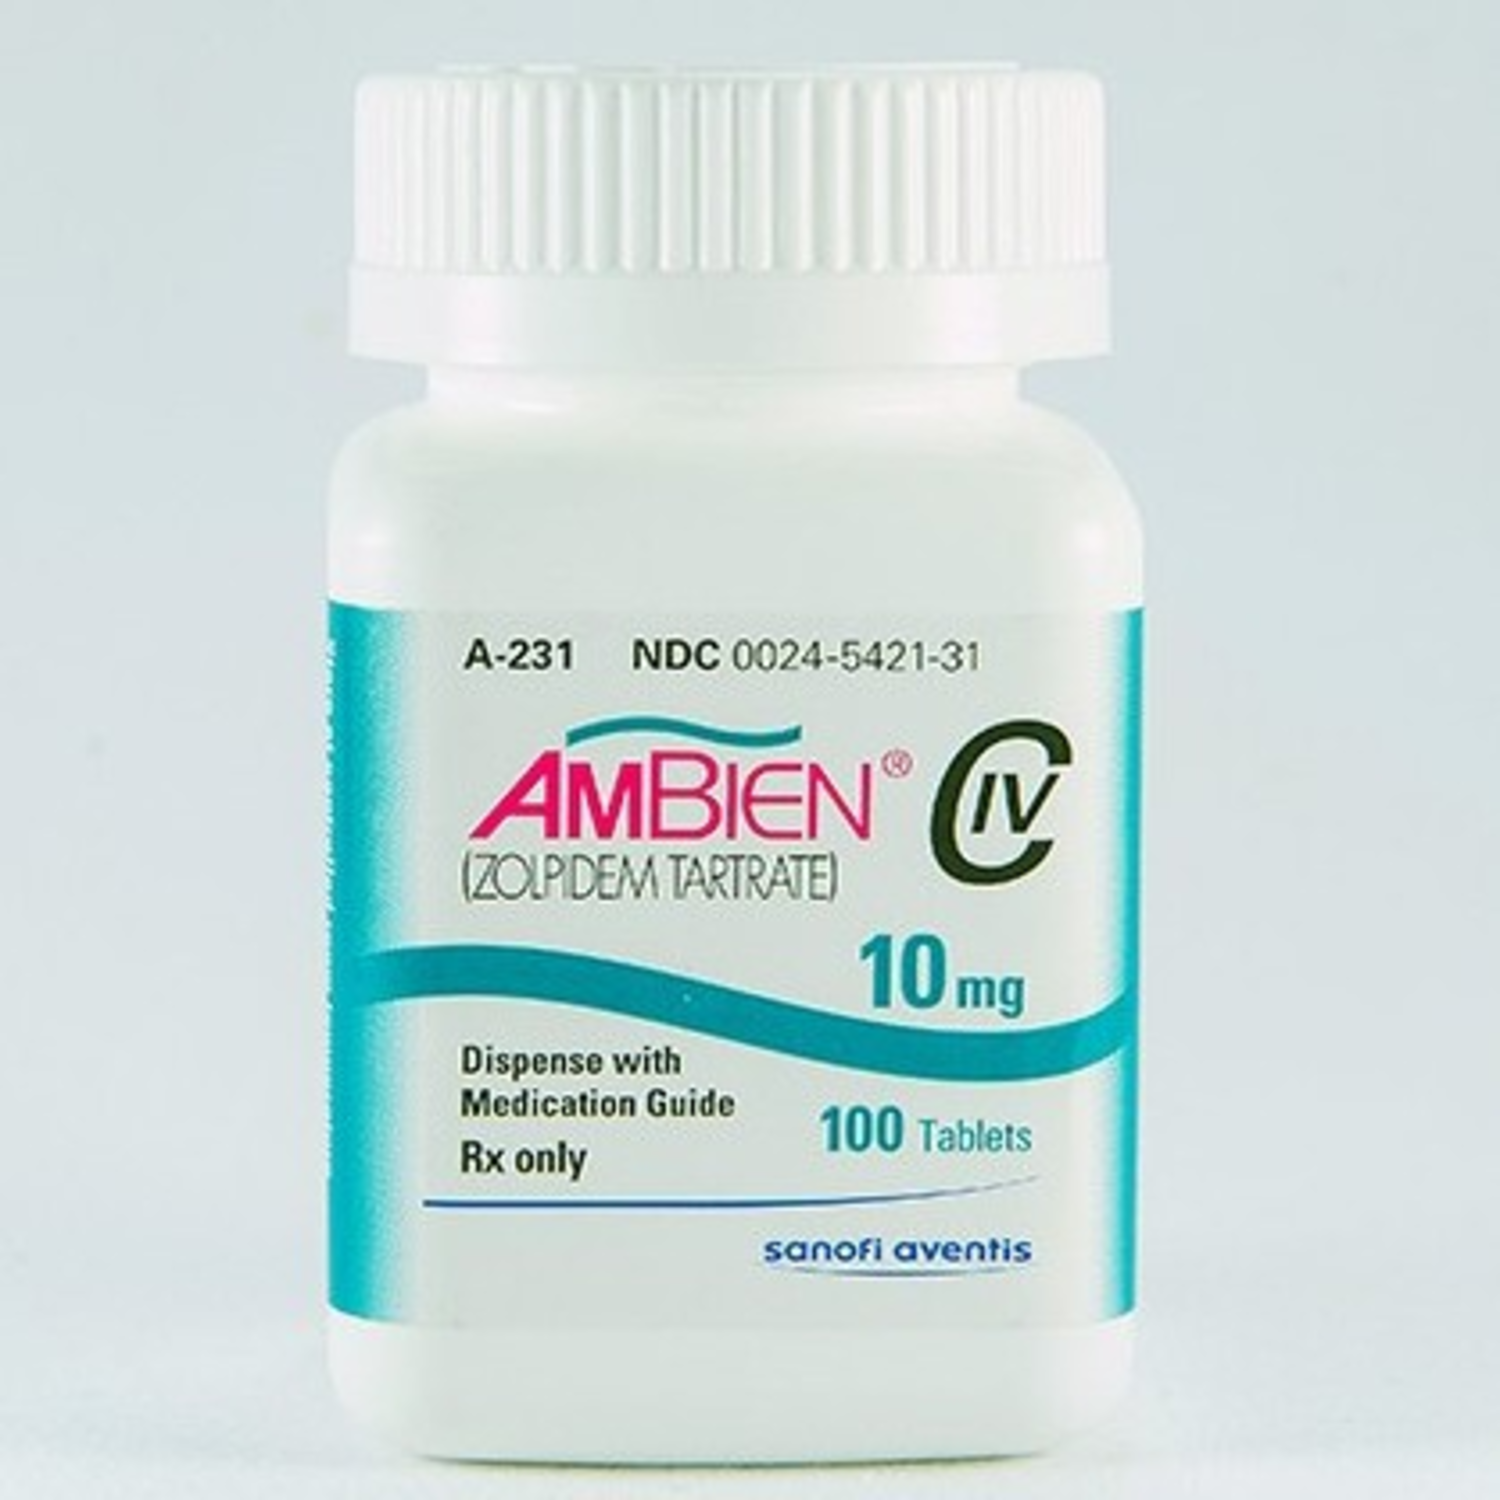 Zolpidem Ambien 10mg Tablets